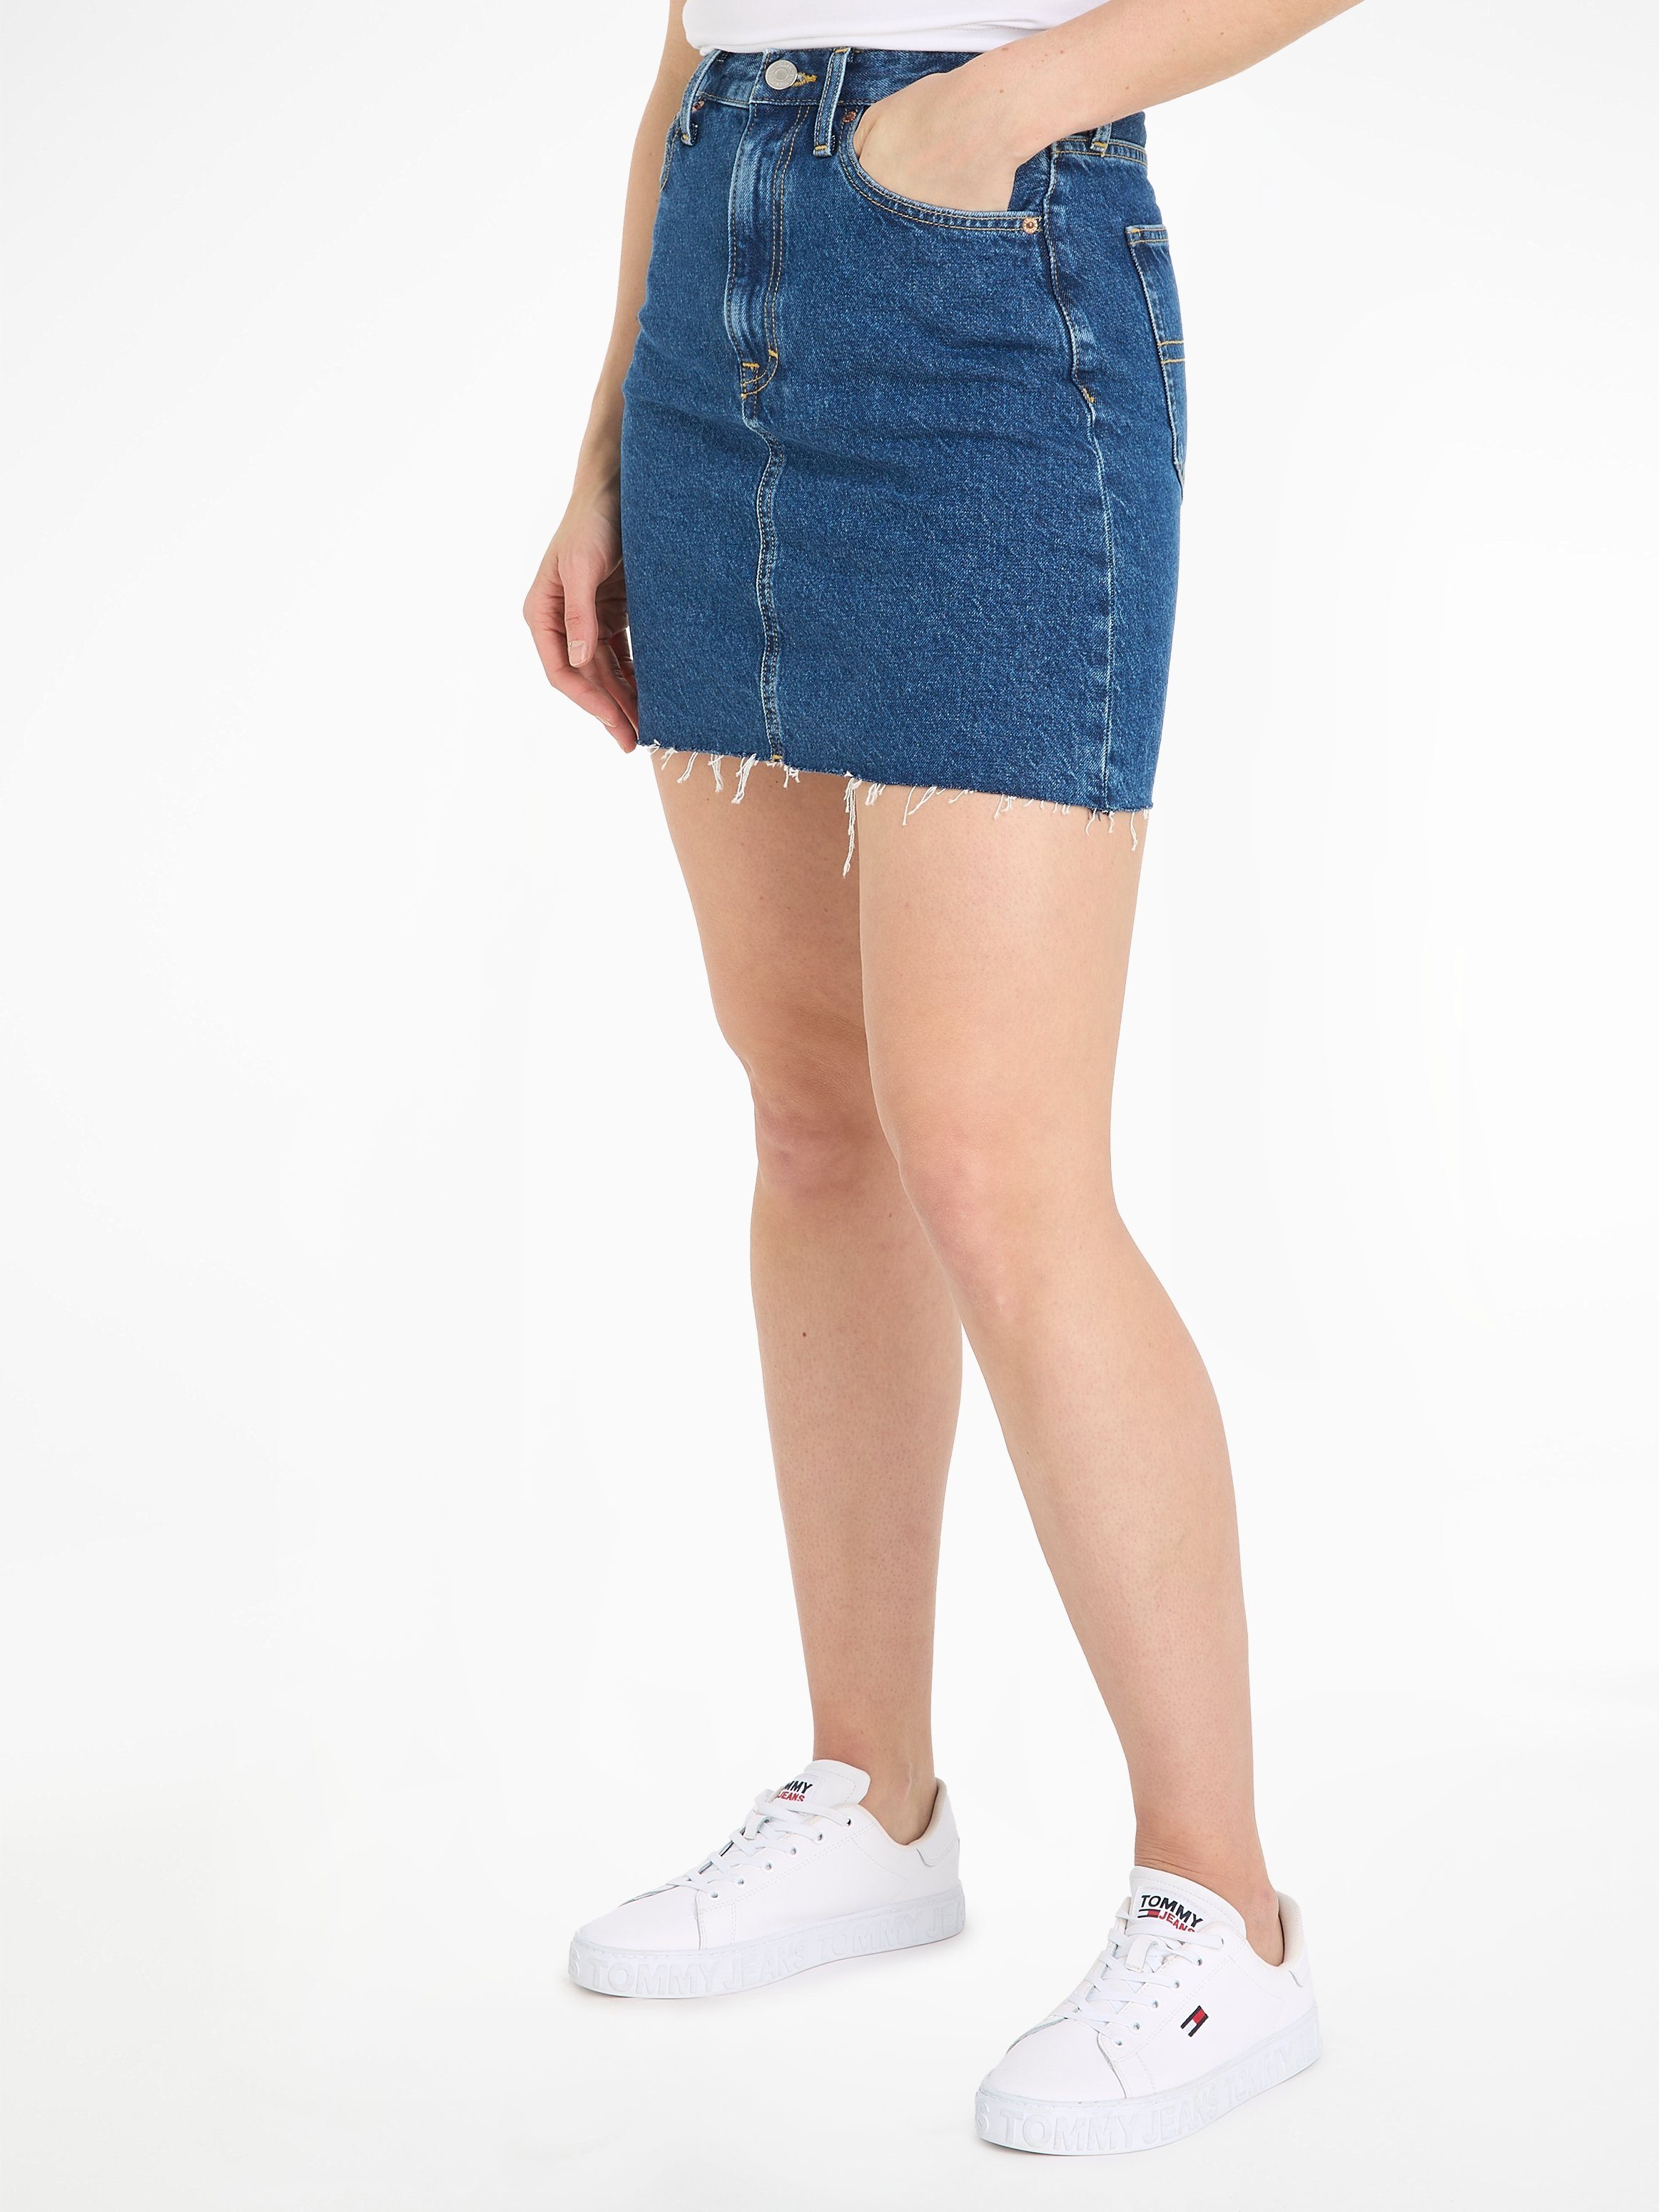 Jeansrock AH4035 MOM Jeans UH SKIRT Logostickerei mit Tommy